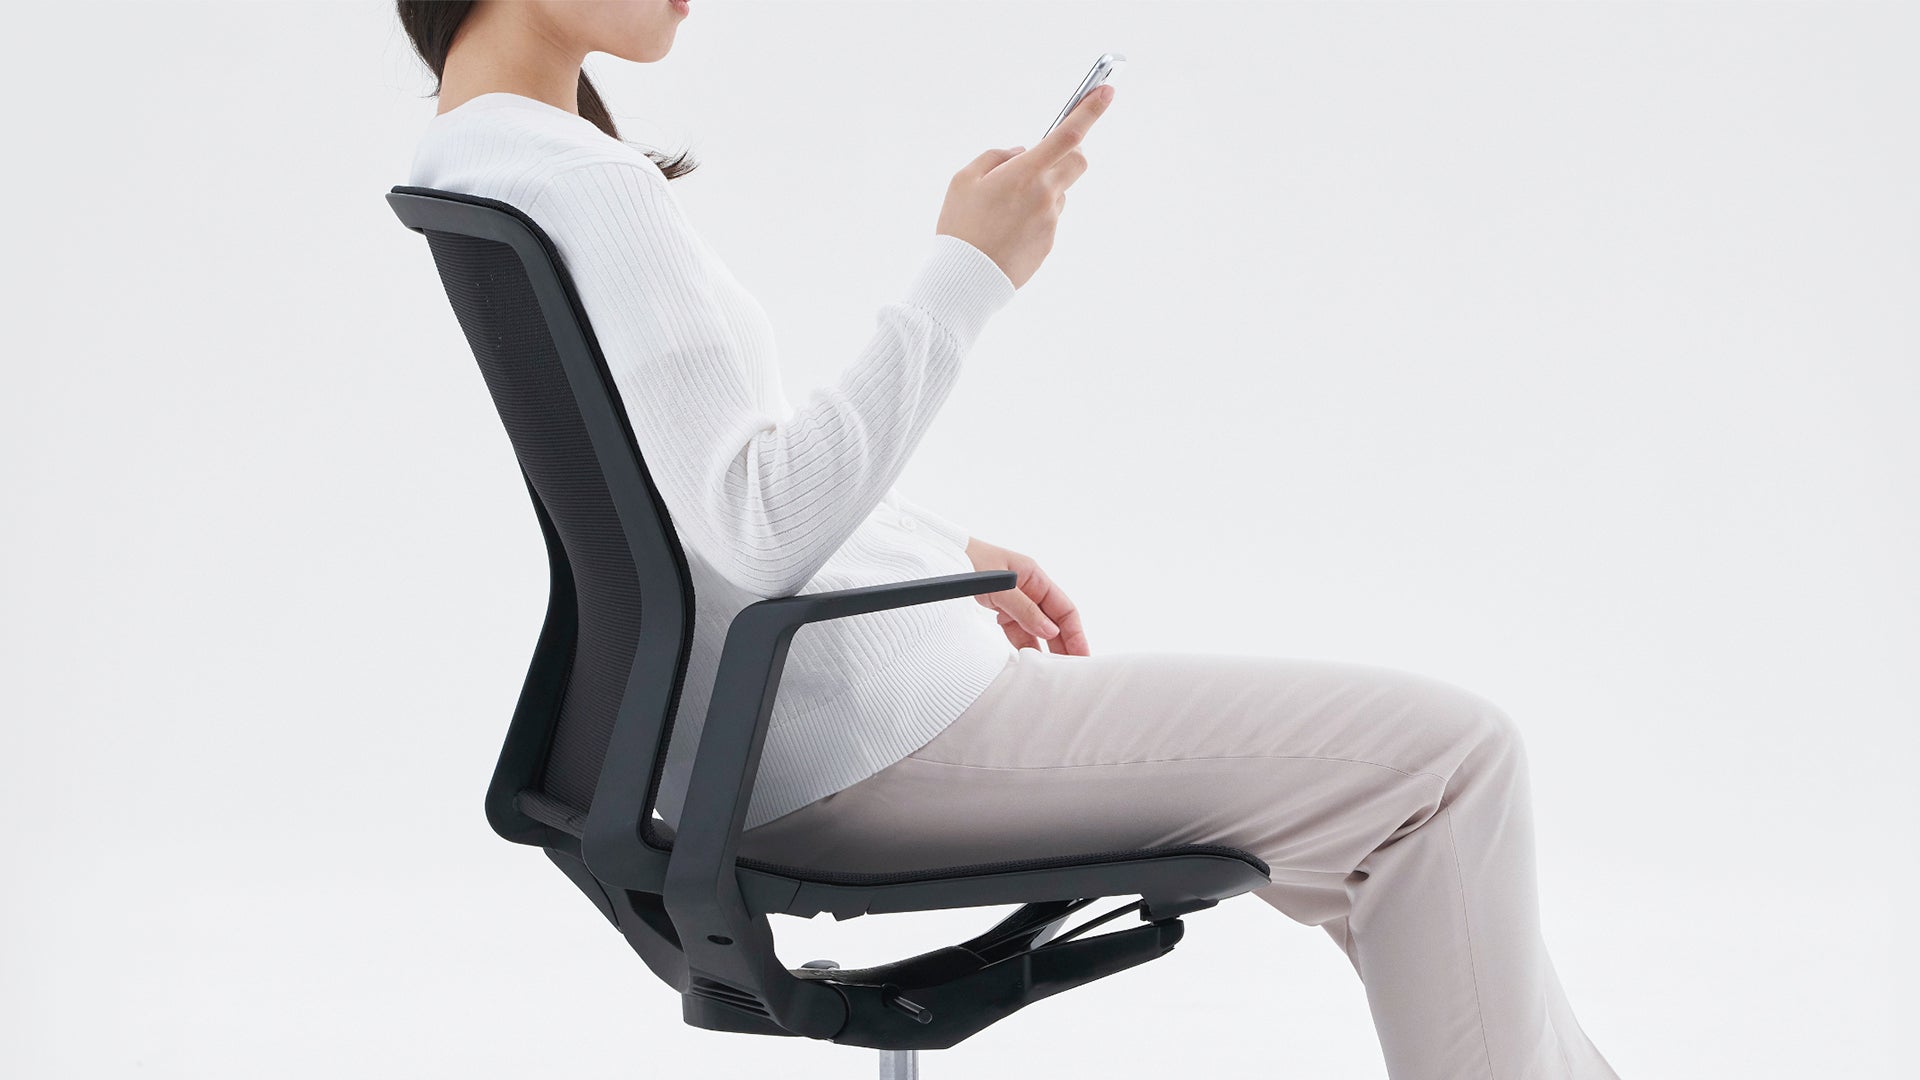 6 Elements of Office Chairs Enhancing Sitting Posture (Part 2)